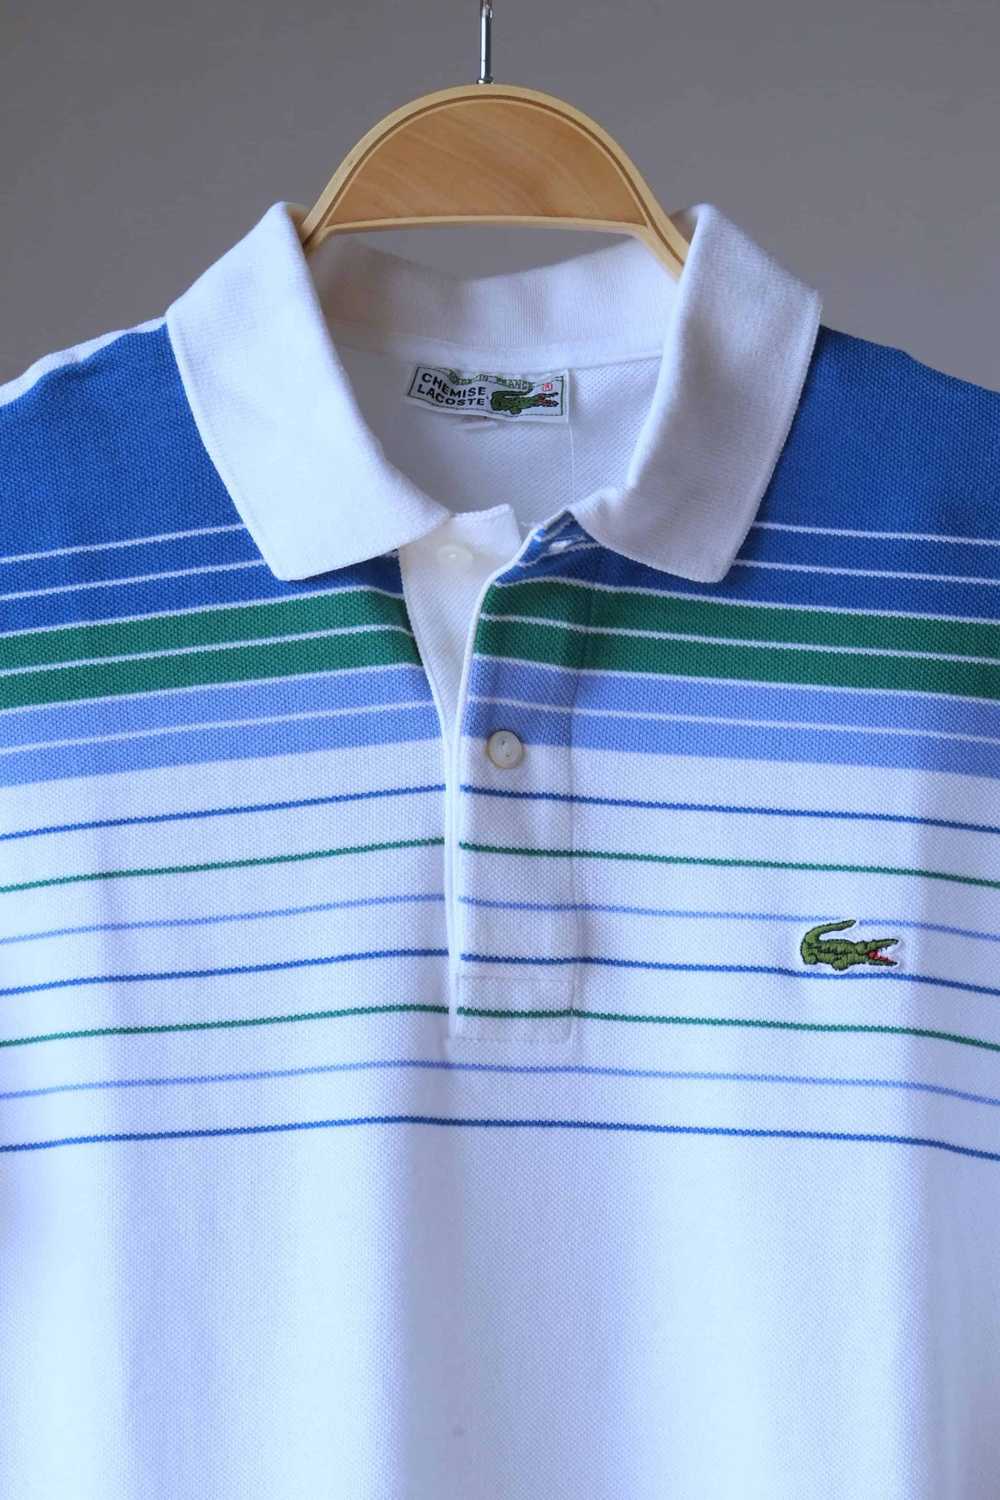 LACOSTE Vintage Striped Polo - image 2